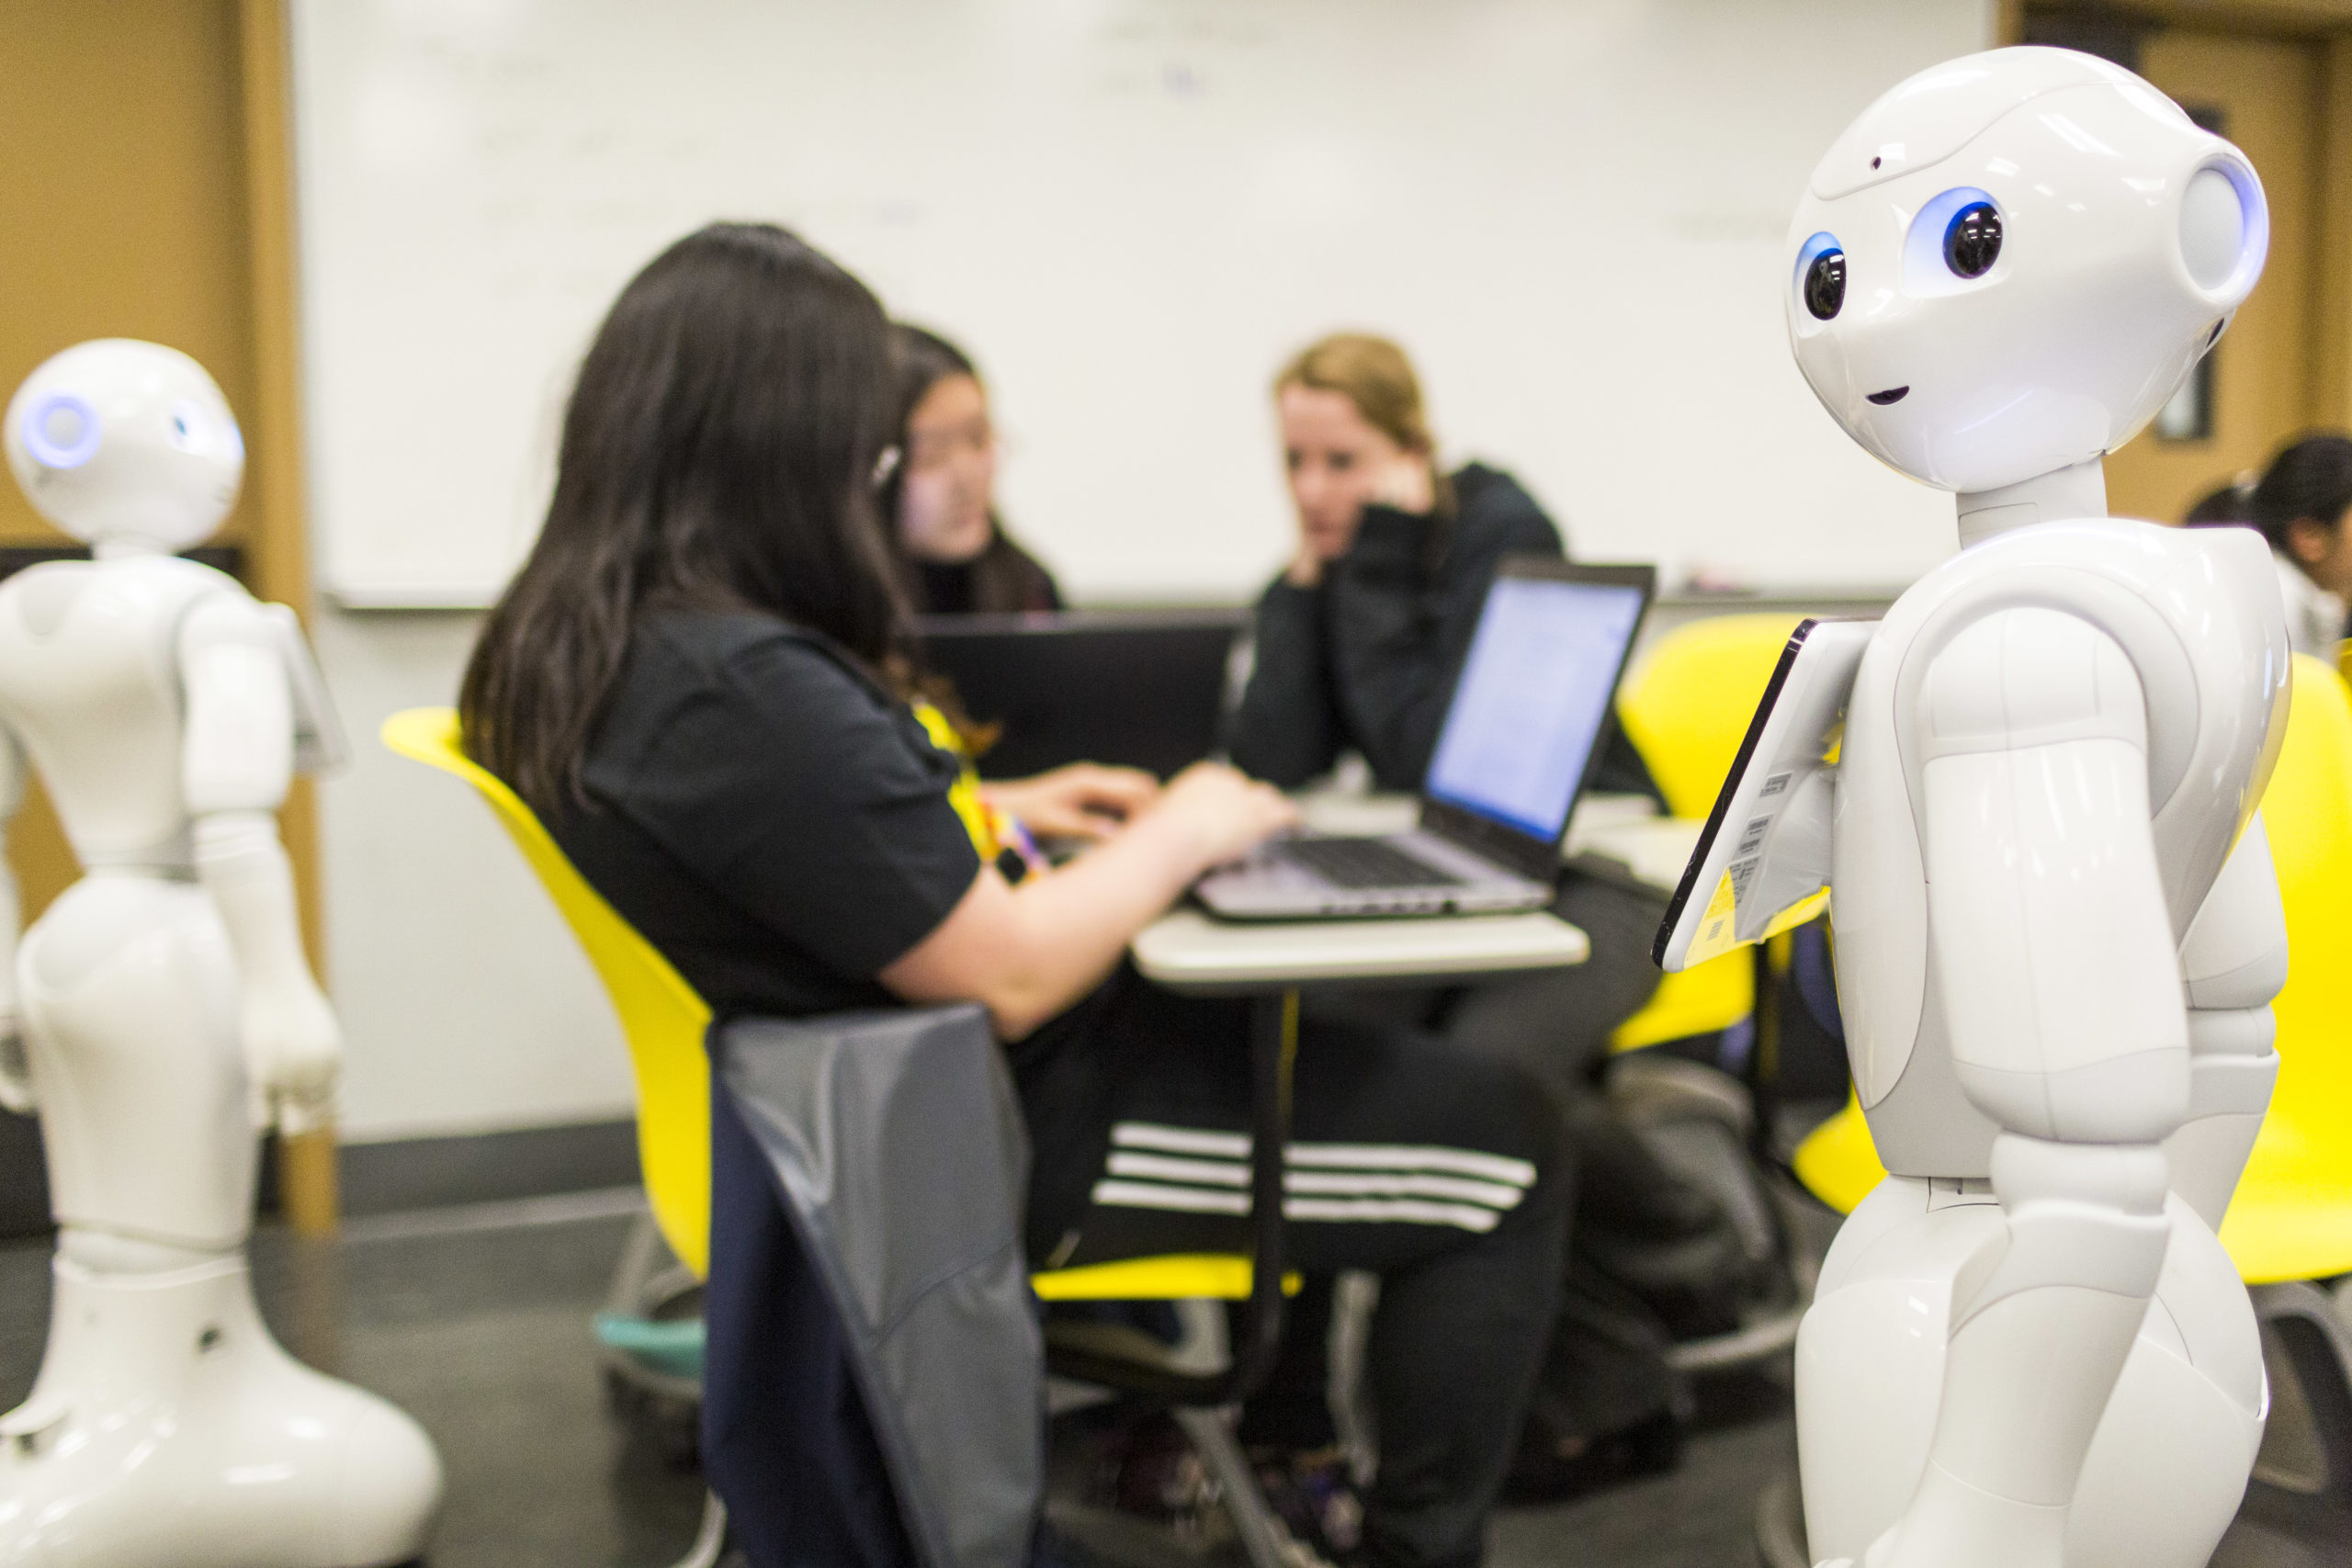 Tethys enables students to code for SoftBank's Pepper humanoid robot